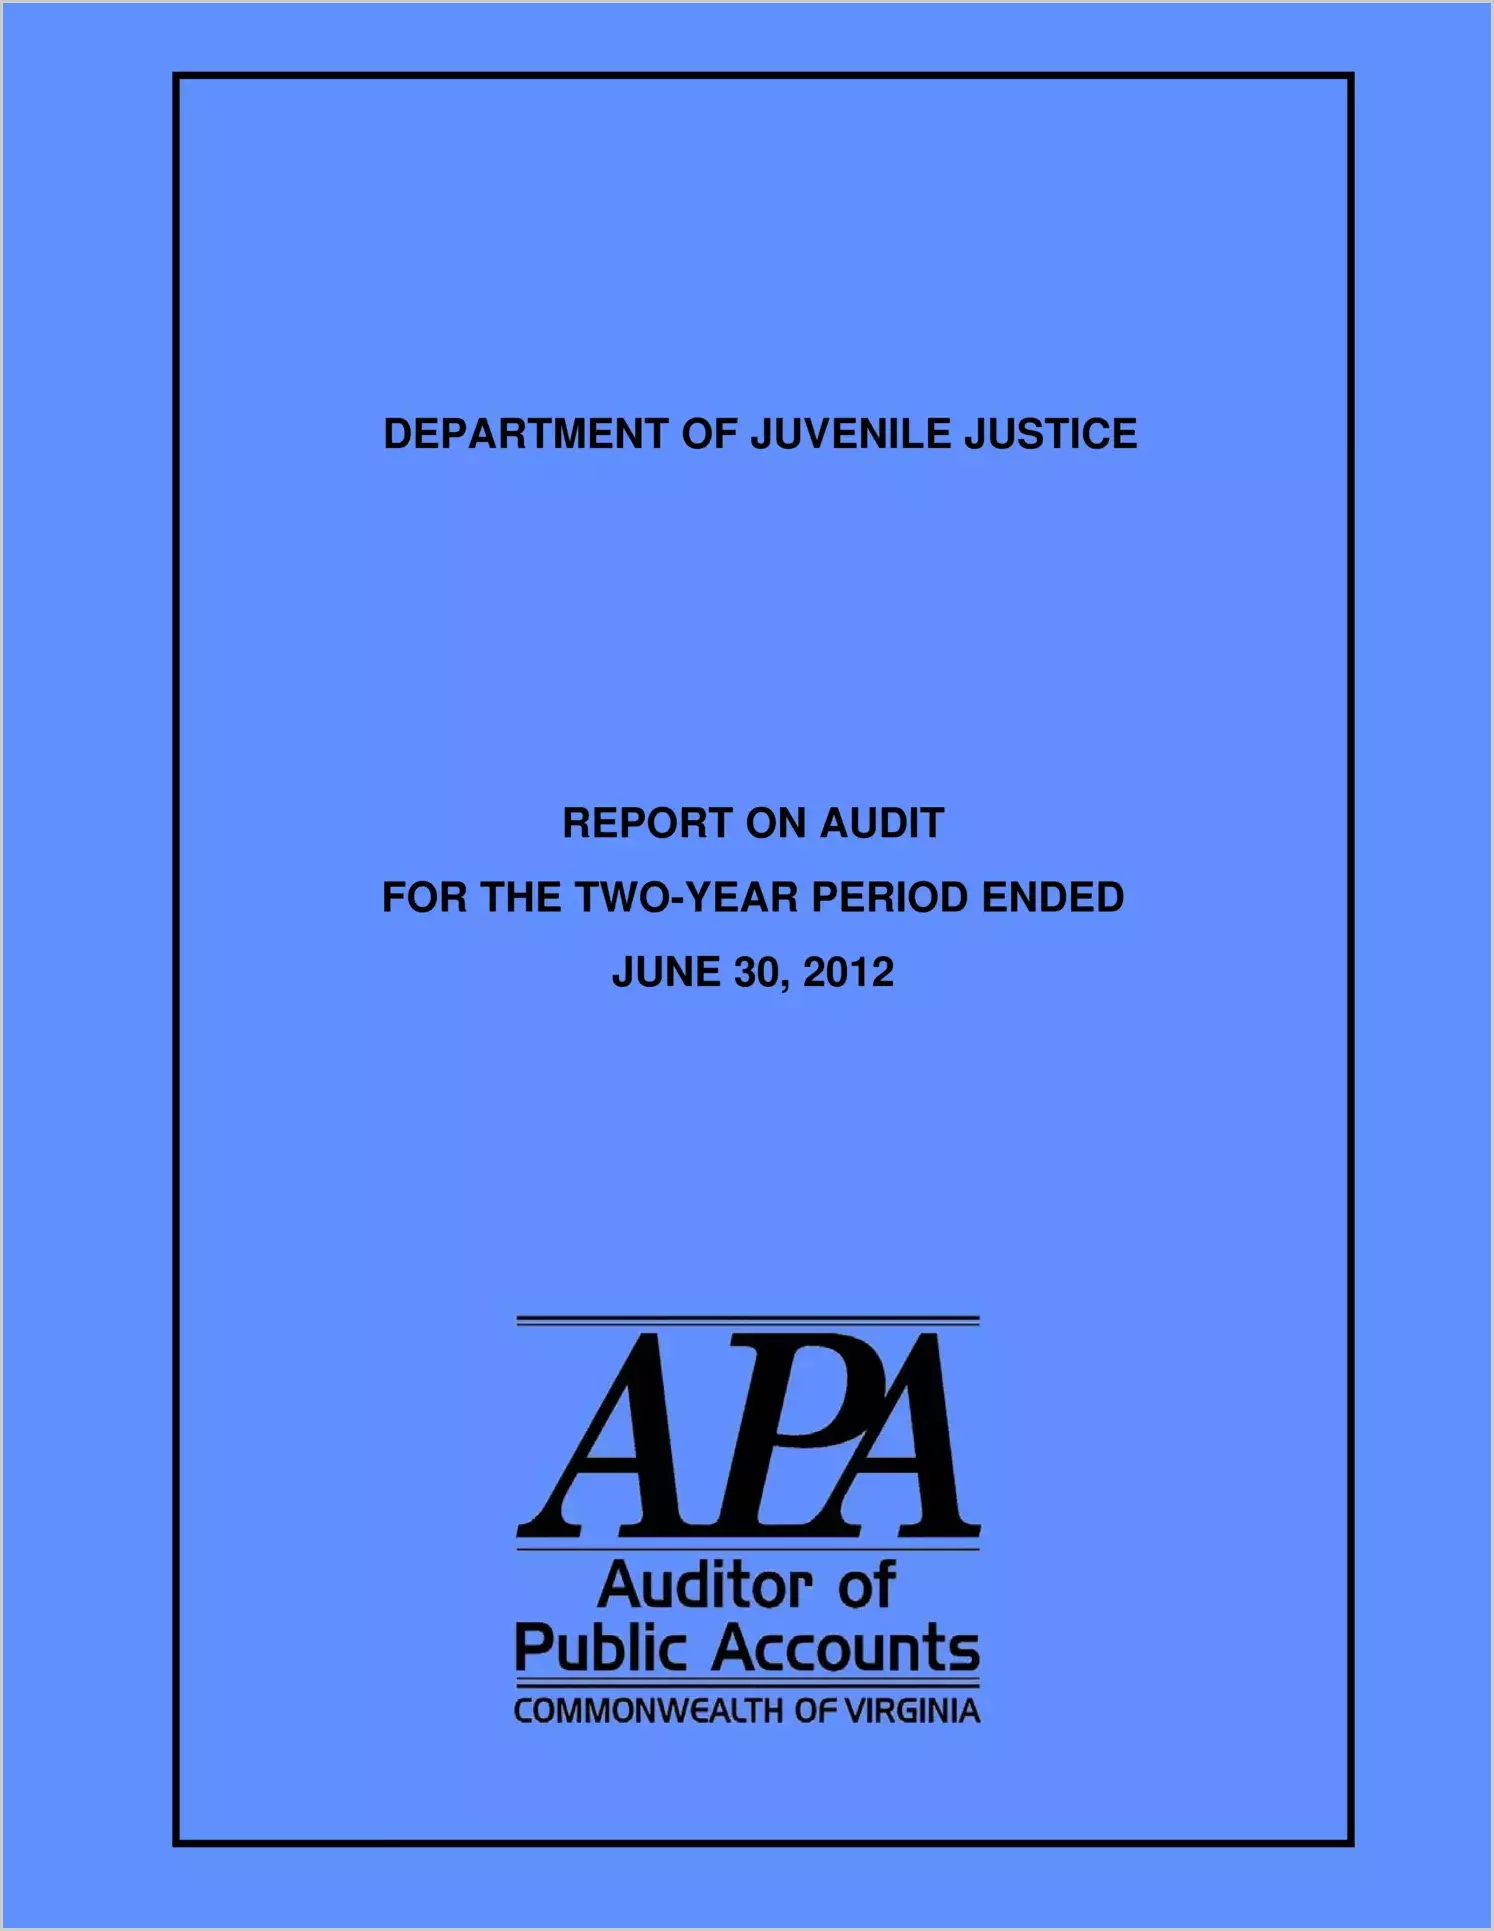 Department of Juvenile Justice for the two-year period ended June 30, 2012